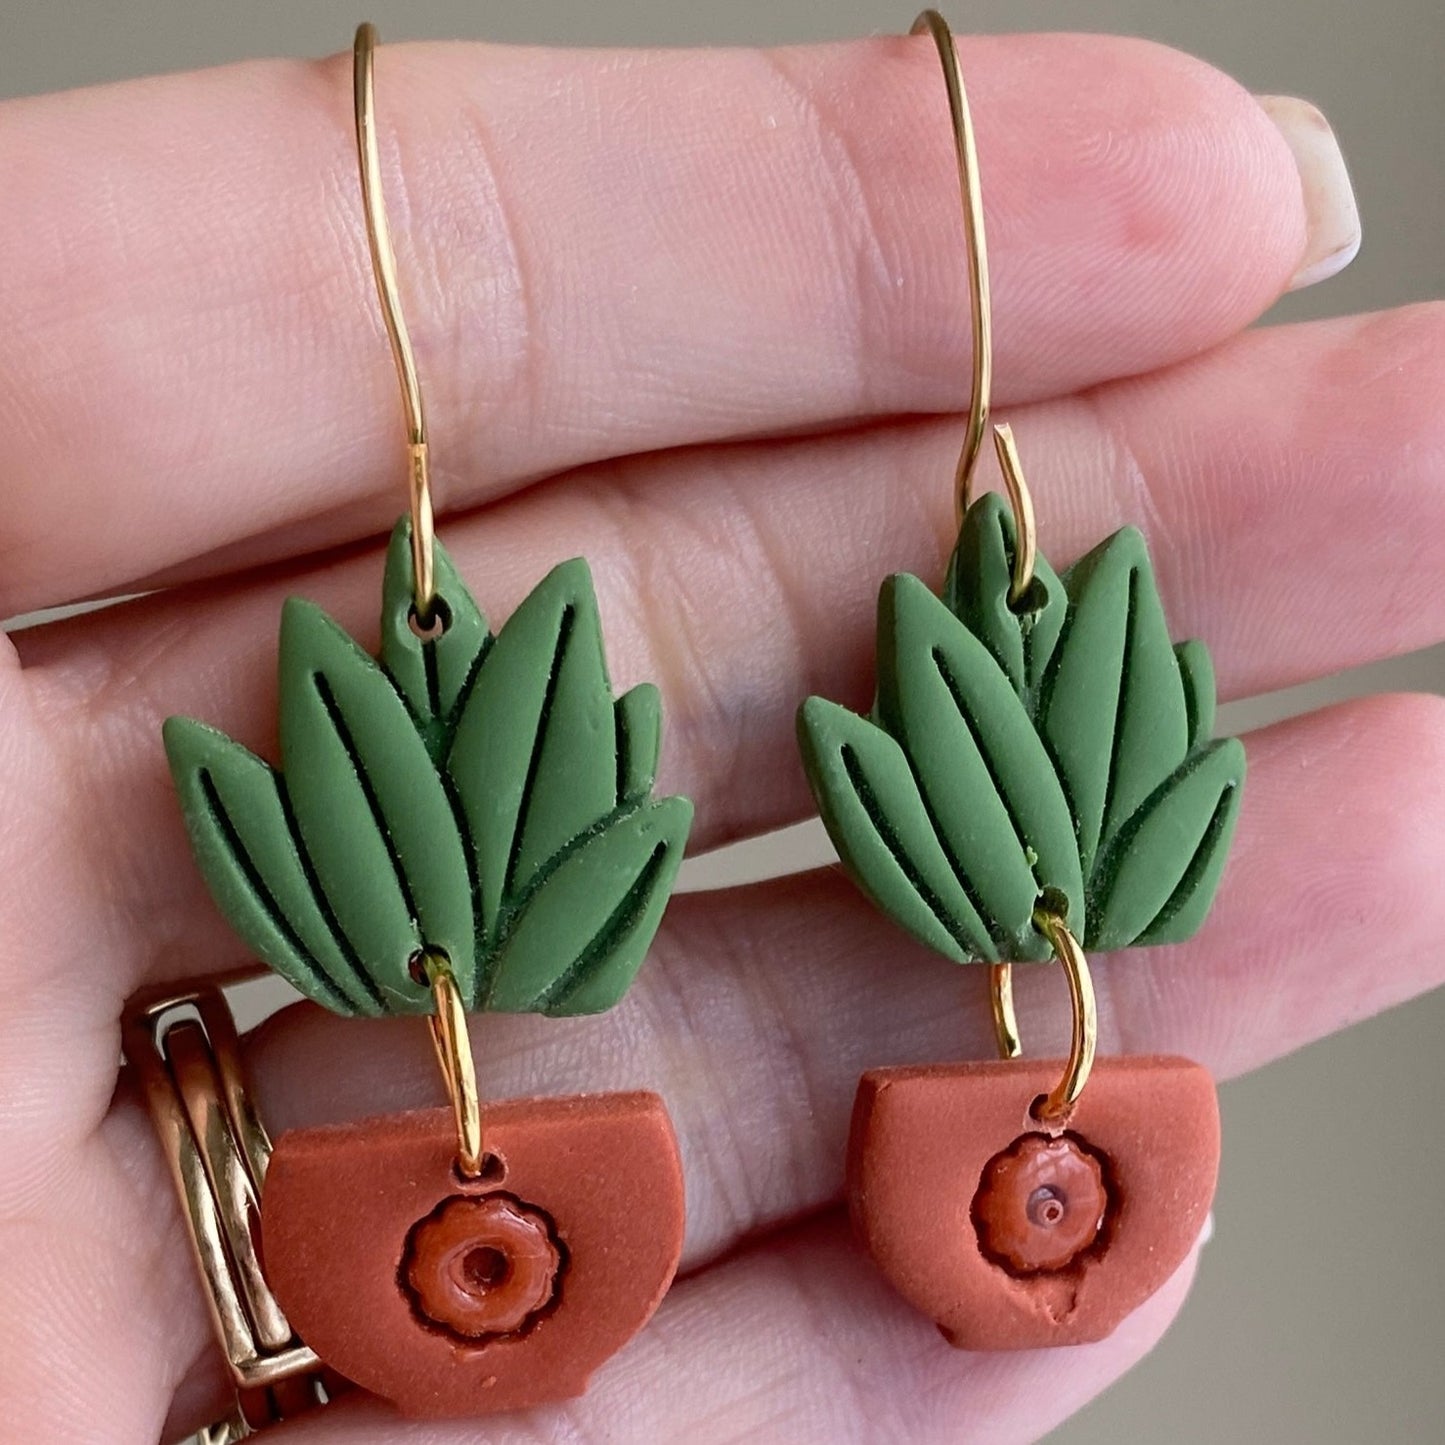   Pot and plant textured polymer clay dangle earrings 0125 by Wendy Varner Designs